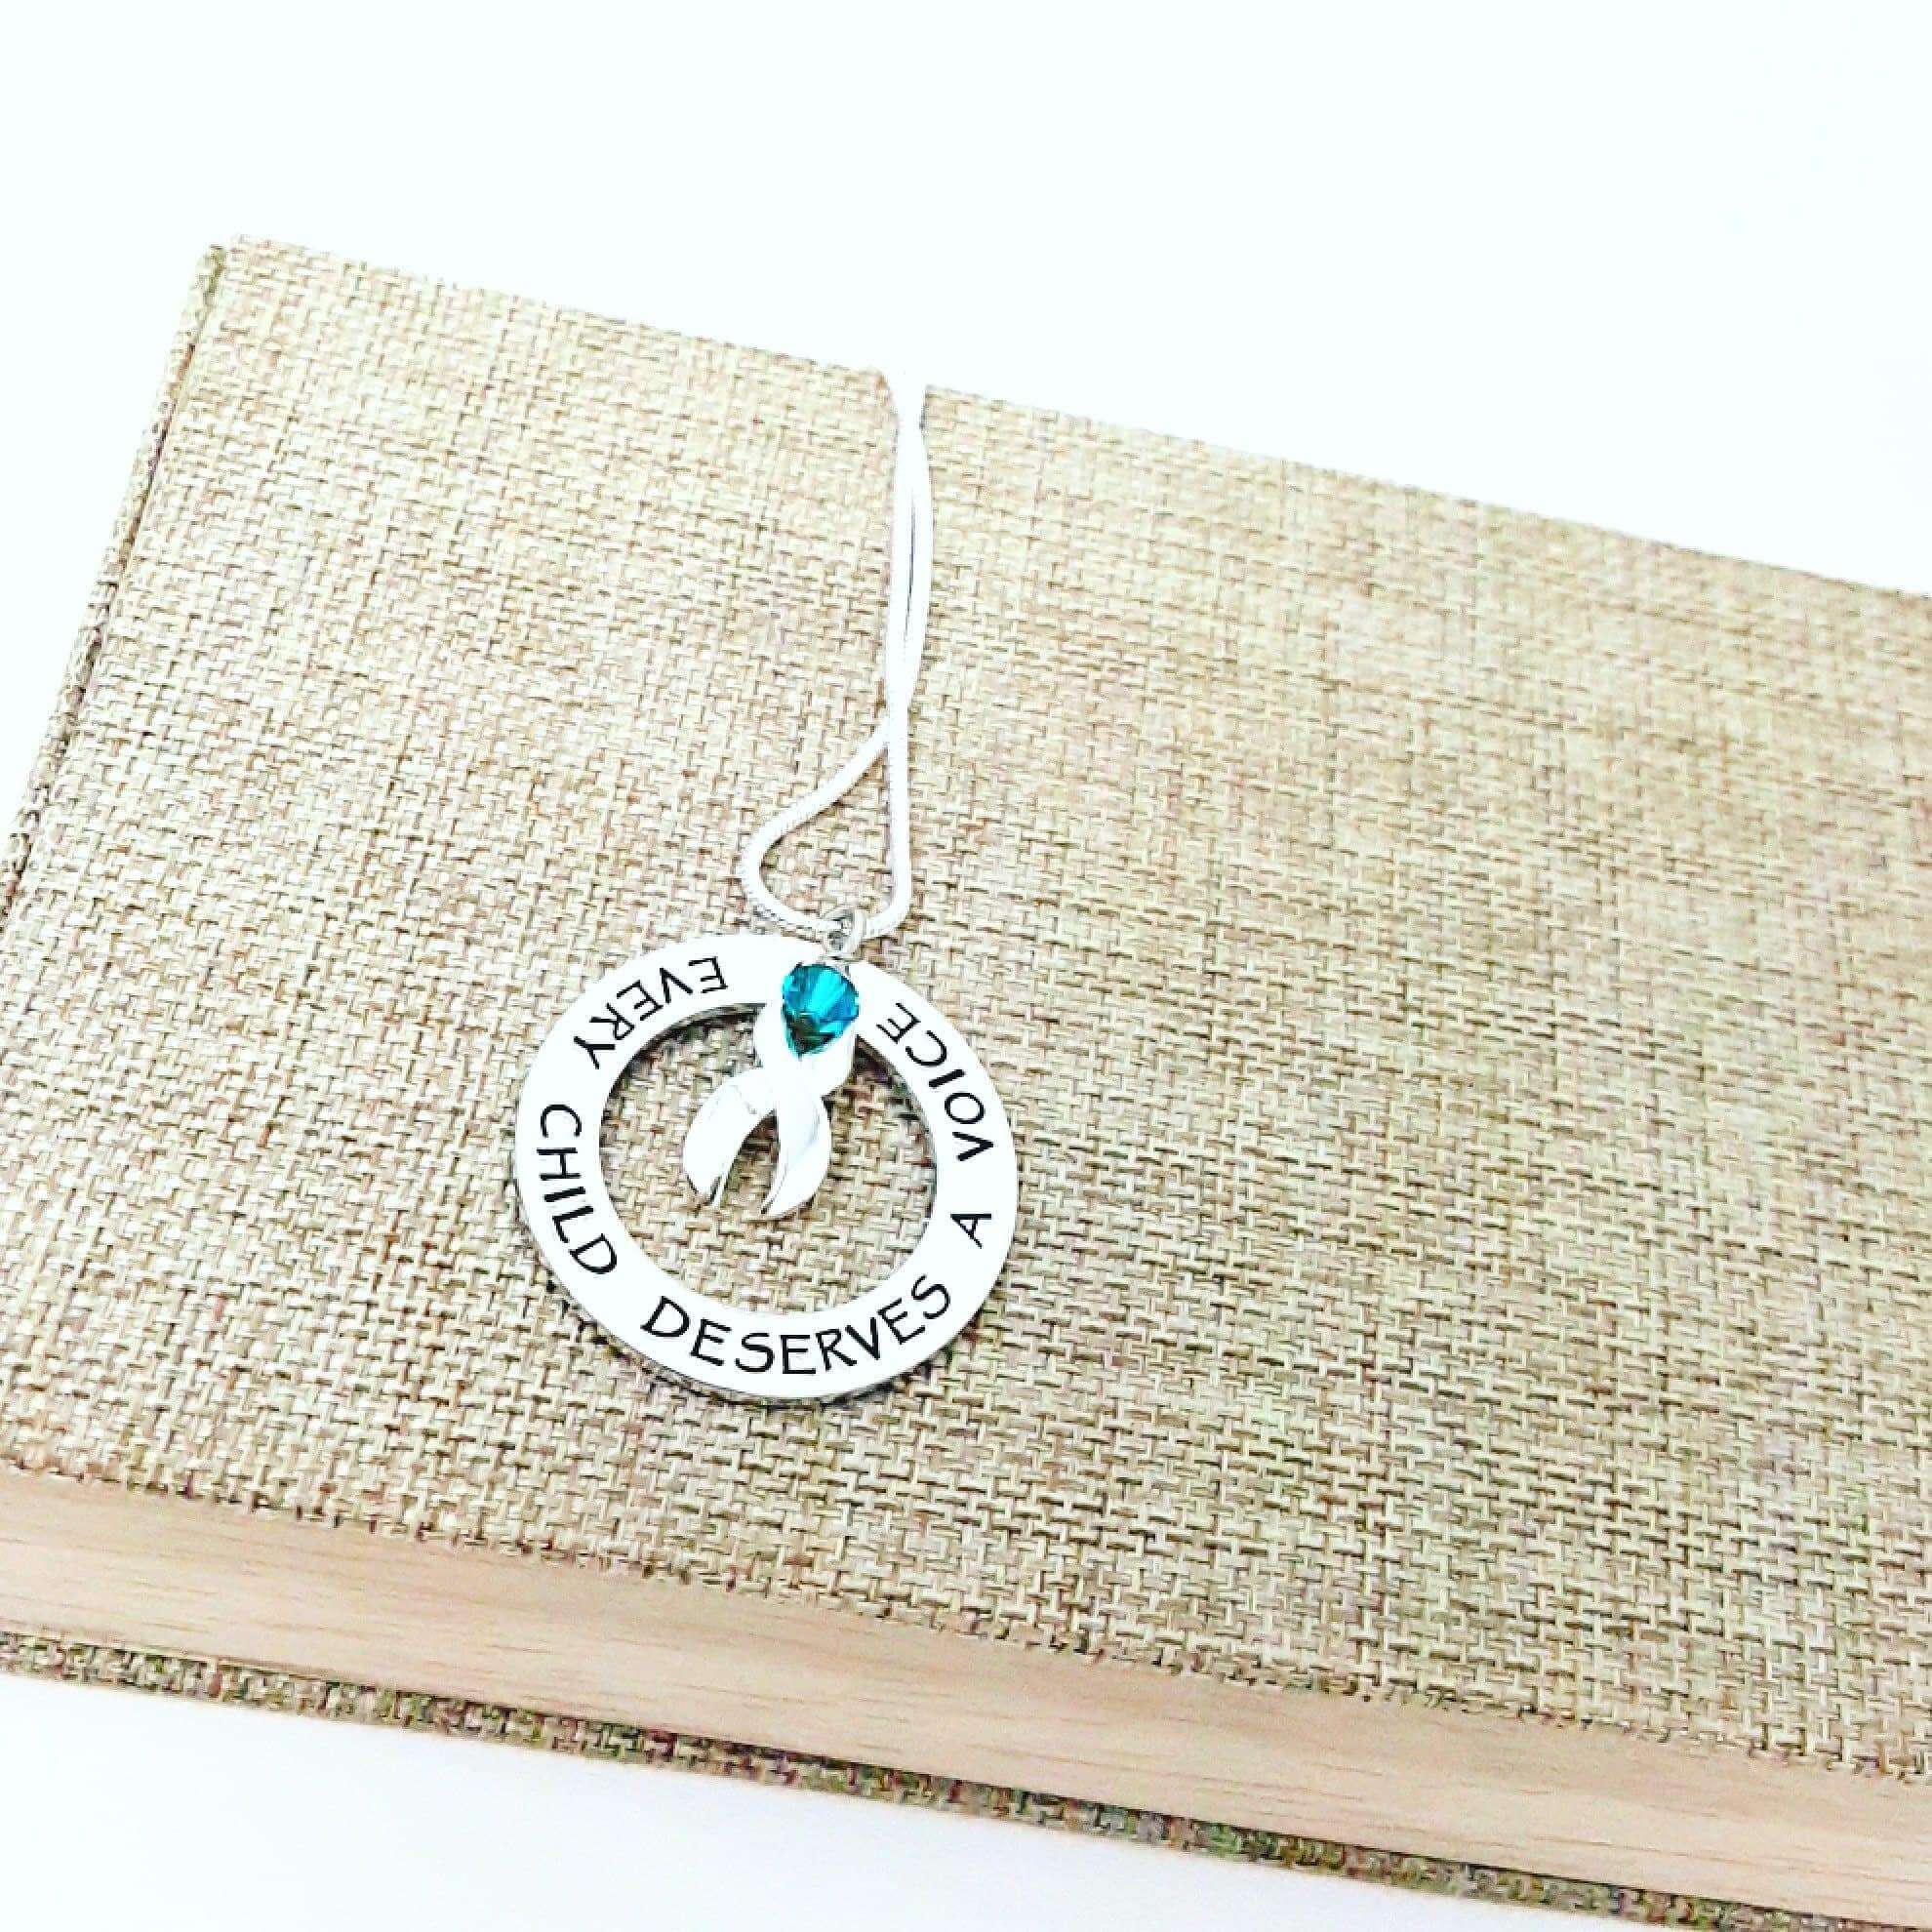 Every Child Deserves A Voice Necklace - Apraxia Awareness & Support - Apraxia of Speech, Necklaces, HandmadeLoveStories, HandmadeLoveStories , [Handmade_Love_Stories], [Hand_Stamped_Jewelry], [Etsy_Stamped_Jewelry], [Etsy_Jewelry]